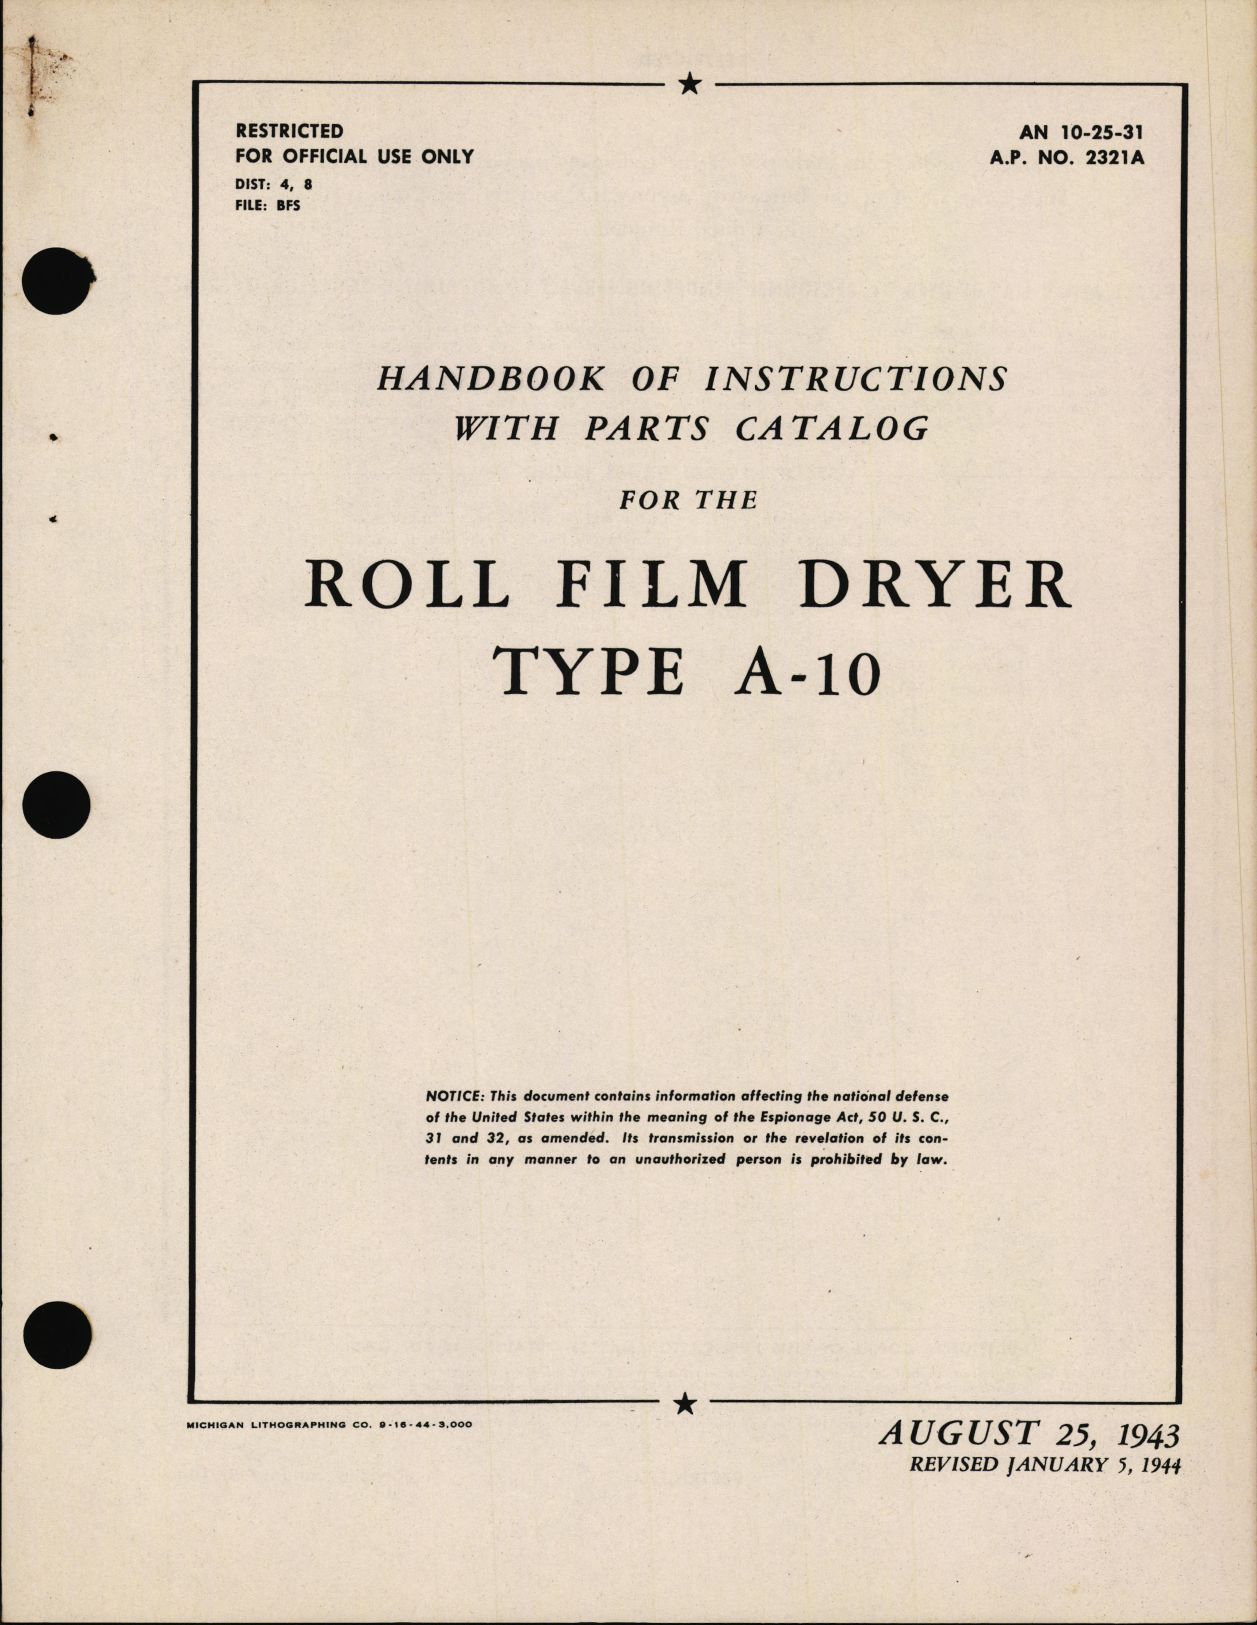 Sample page 7 from AirCorps Library document: Operation, Service, & Overhaul Instructions with Parts Catalog for Type A-10 Roll Film Dryer